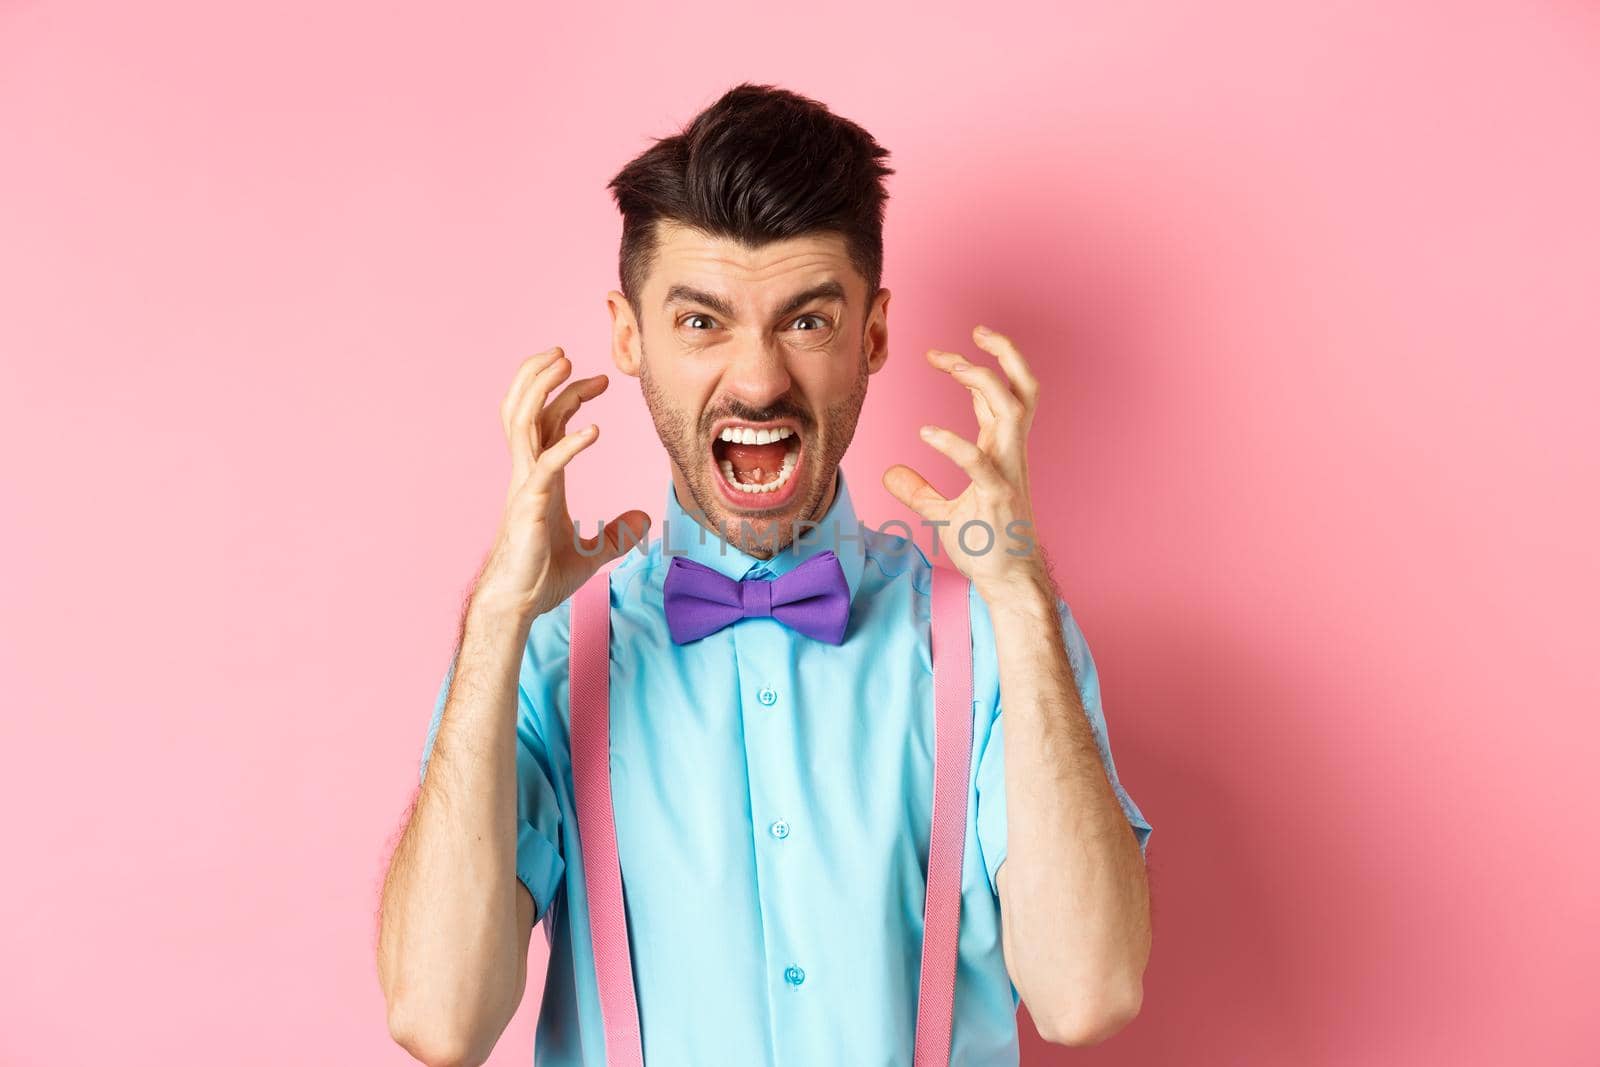 Frustrated young man losing temper, screaming and looking angry at camera, shaking hands pissed-off, standing mad on pink background.